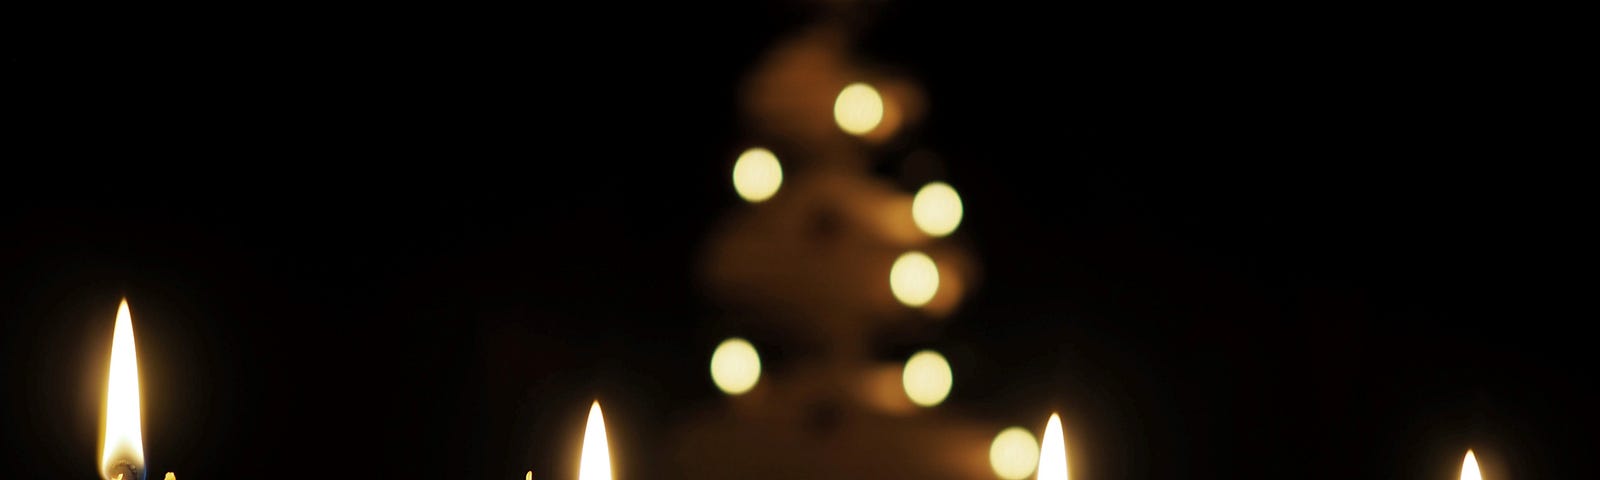 Four candles lit during Advent, the Christmas season.